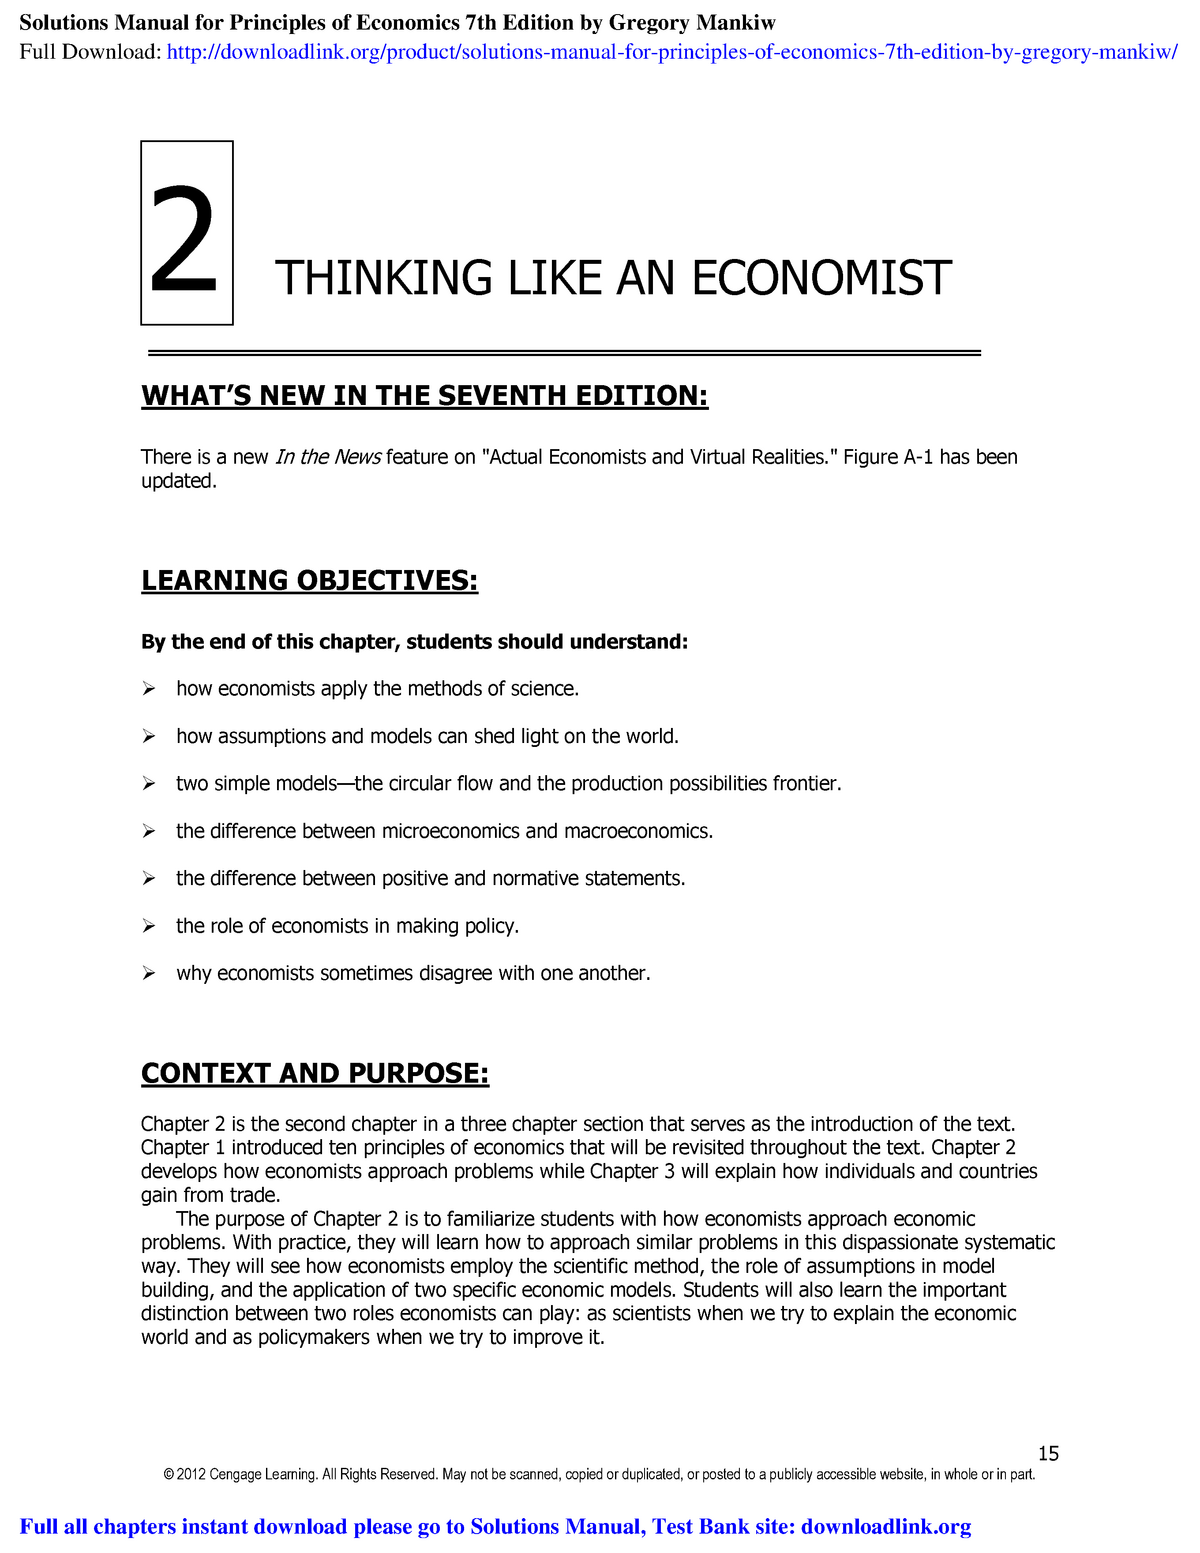 mankiw instructor manual chapter